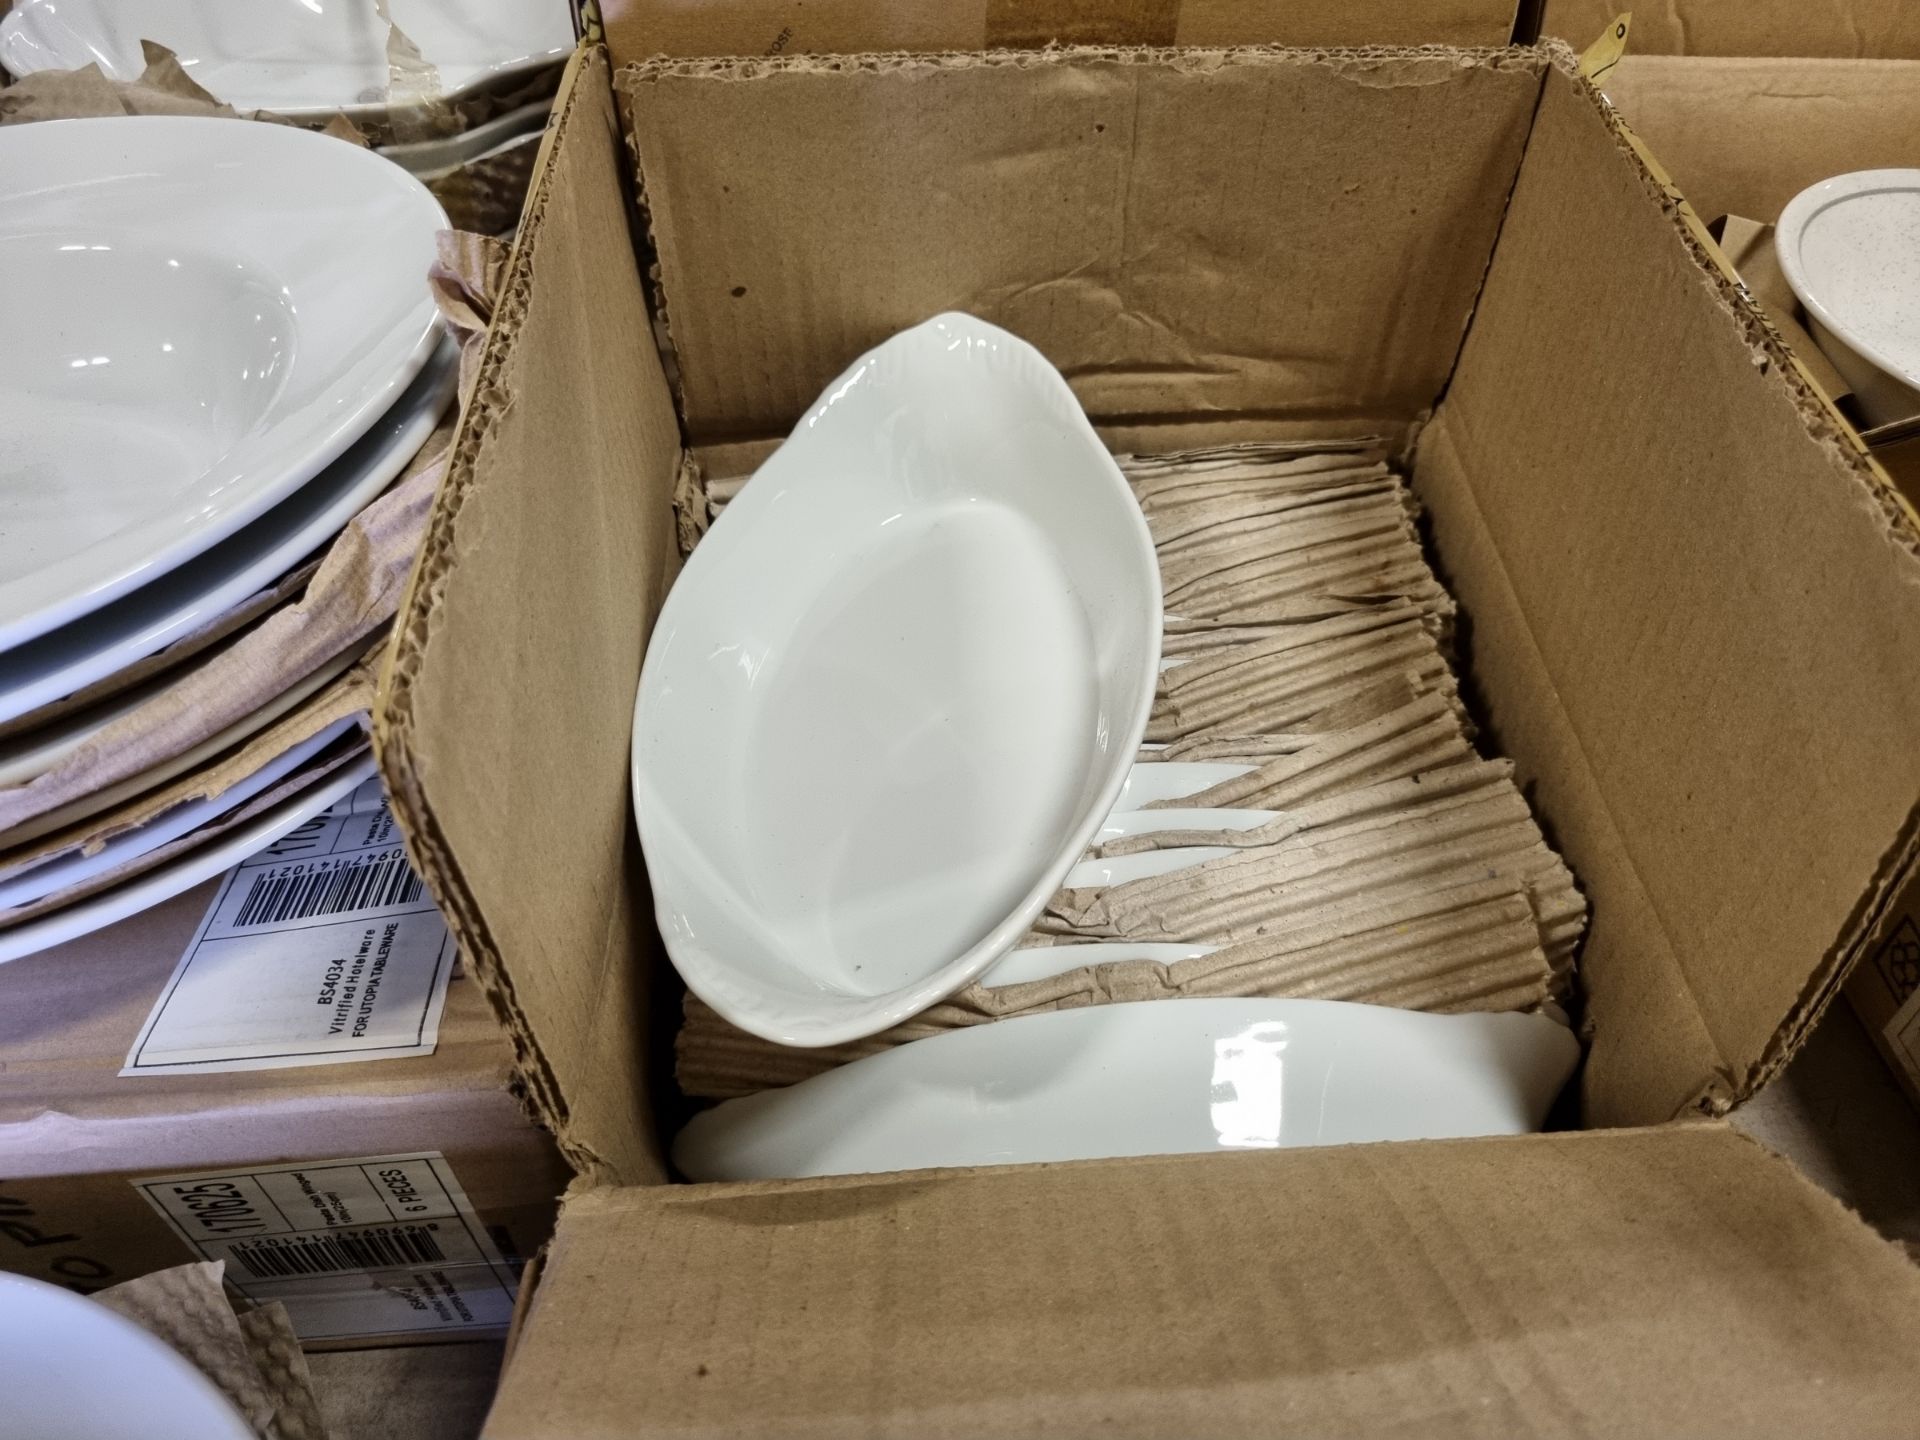 Catering Equipment - White large plates, side plate, saucers, bowls, dishes - Image 4 of 8